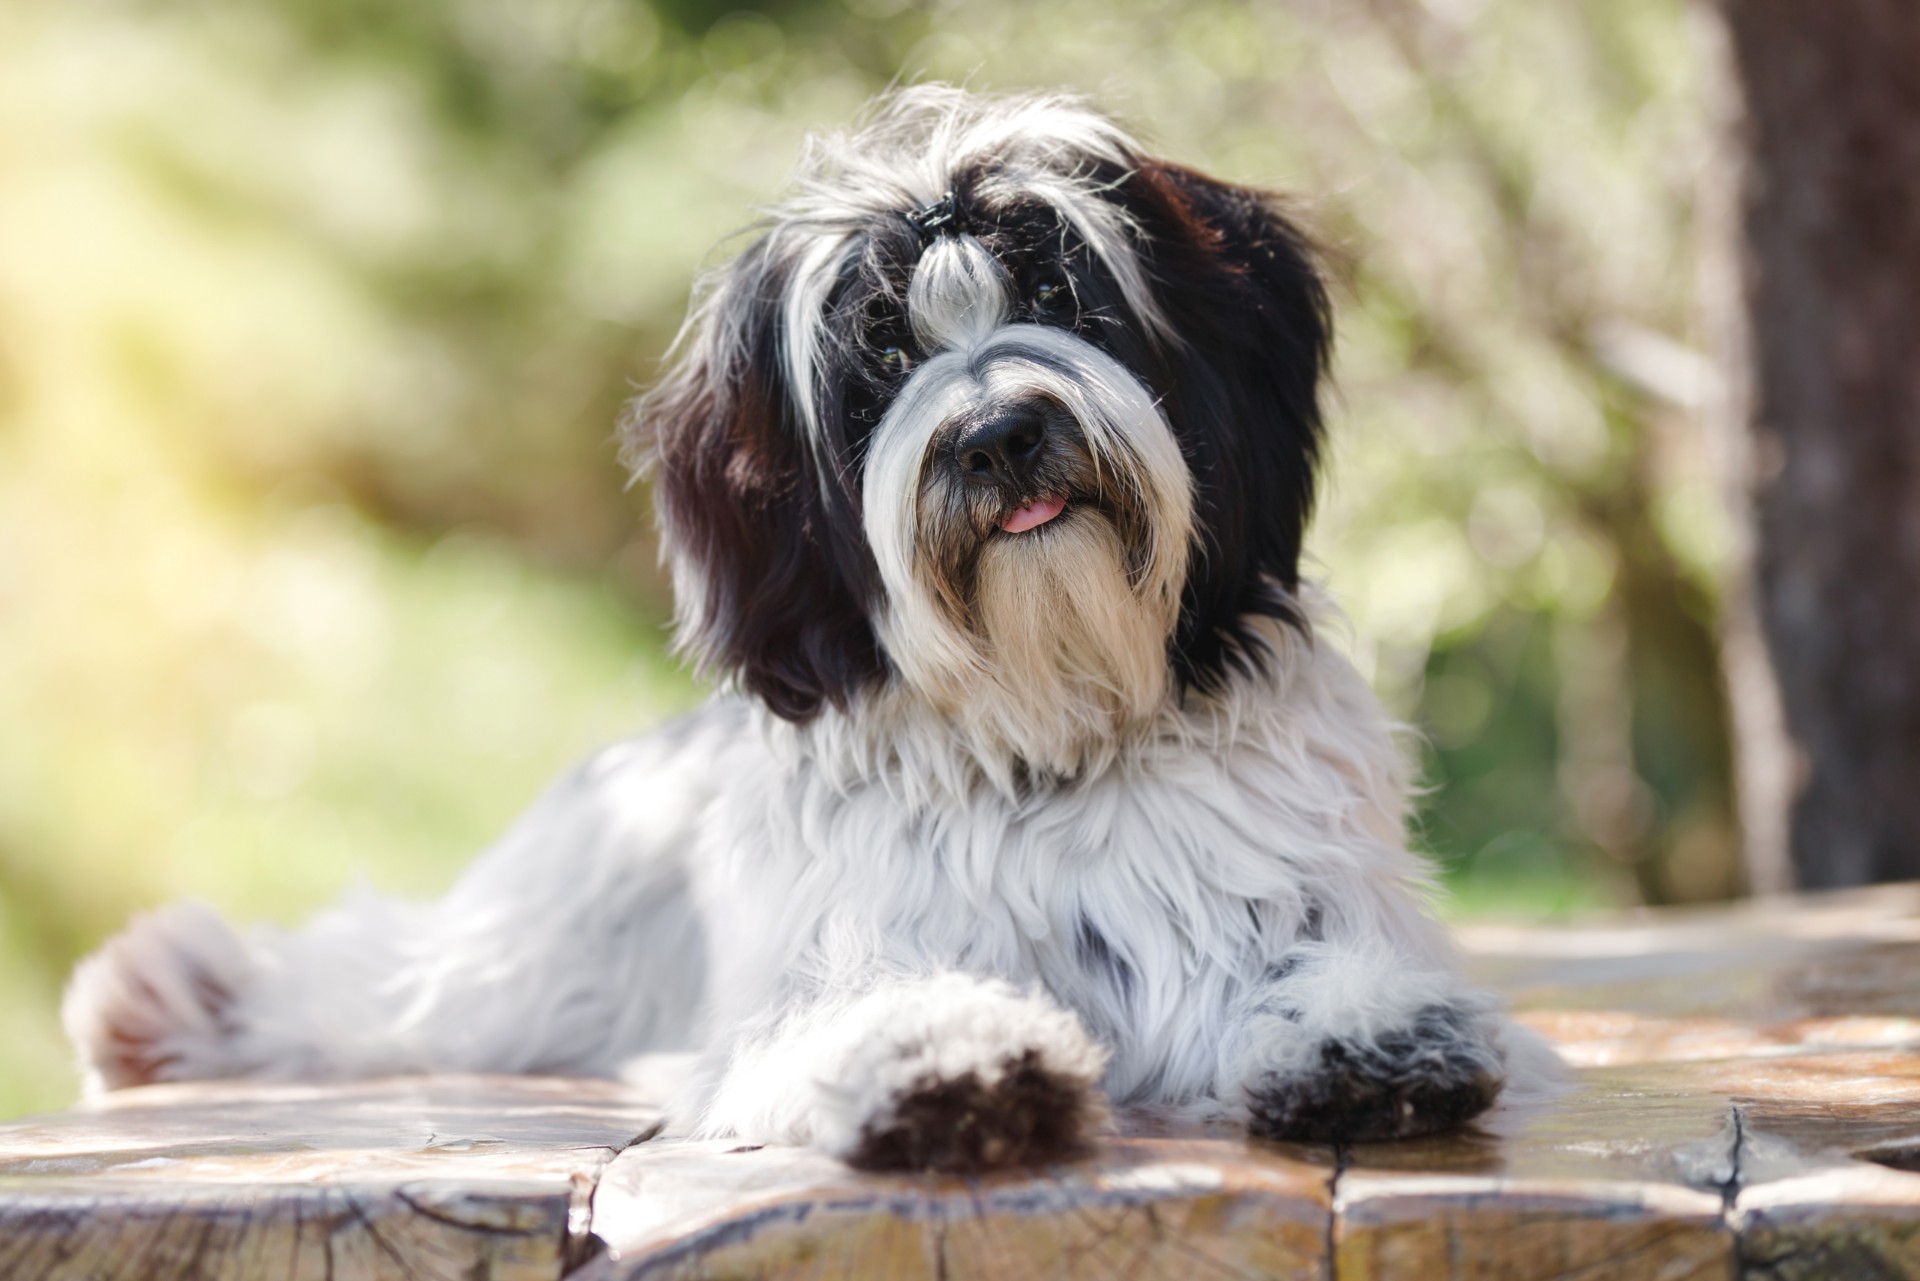 Tibetan Terrier Information and Pictures - PetGuide